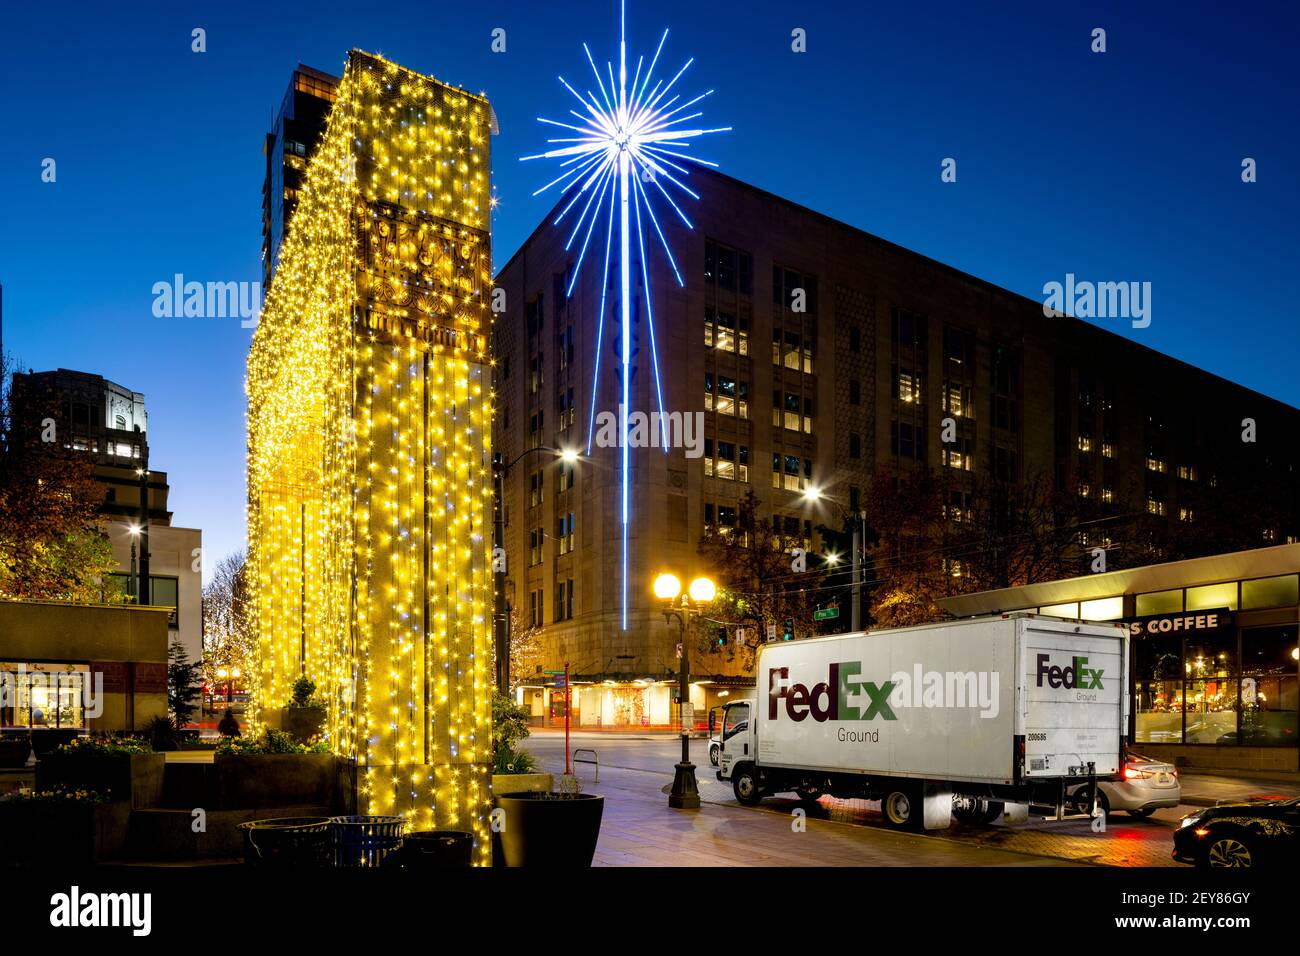 WA17993-00.....WASHINGTON - Christmas decorations in Seattle's West Lake Park with the Seattle Star on the Macy Building. Stock Photo